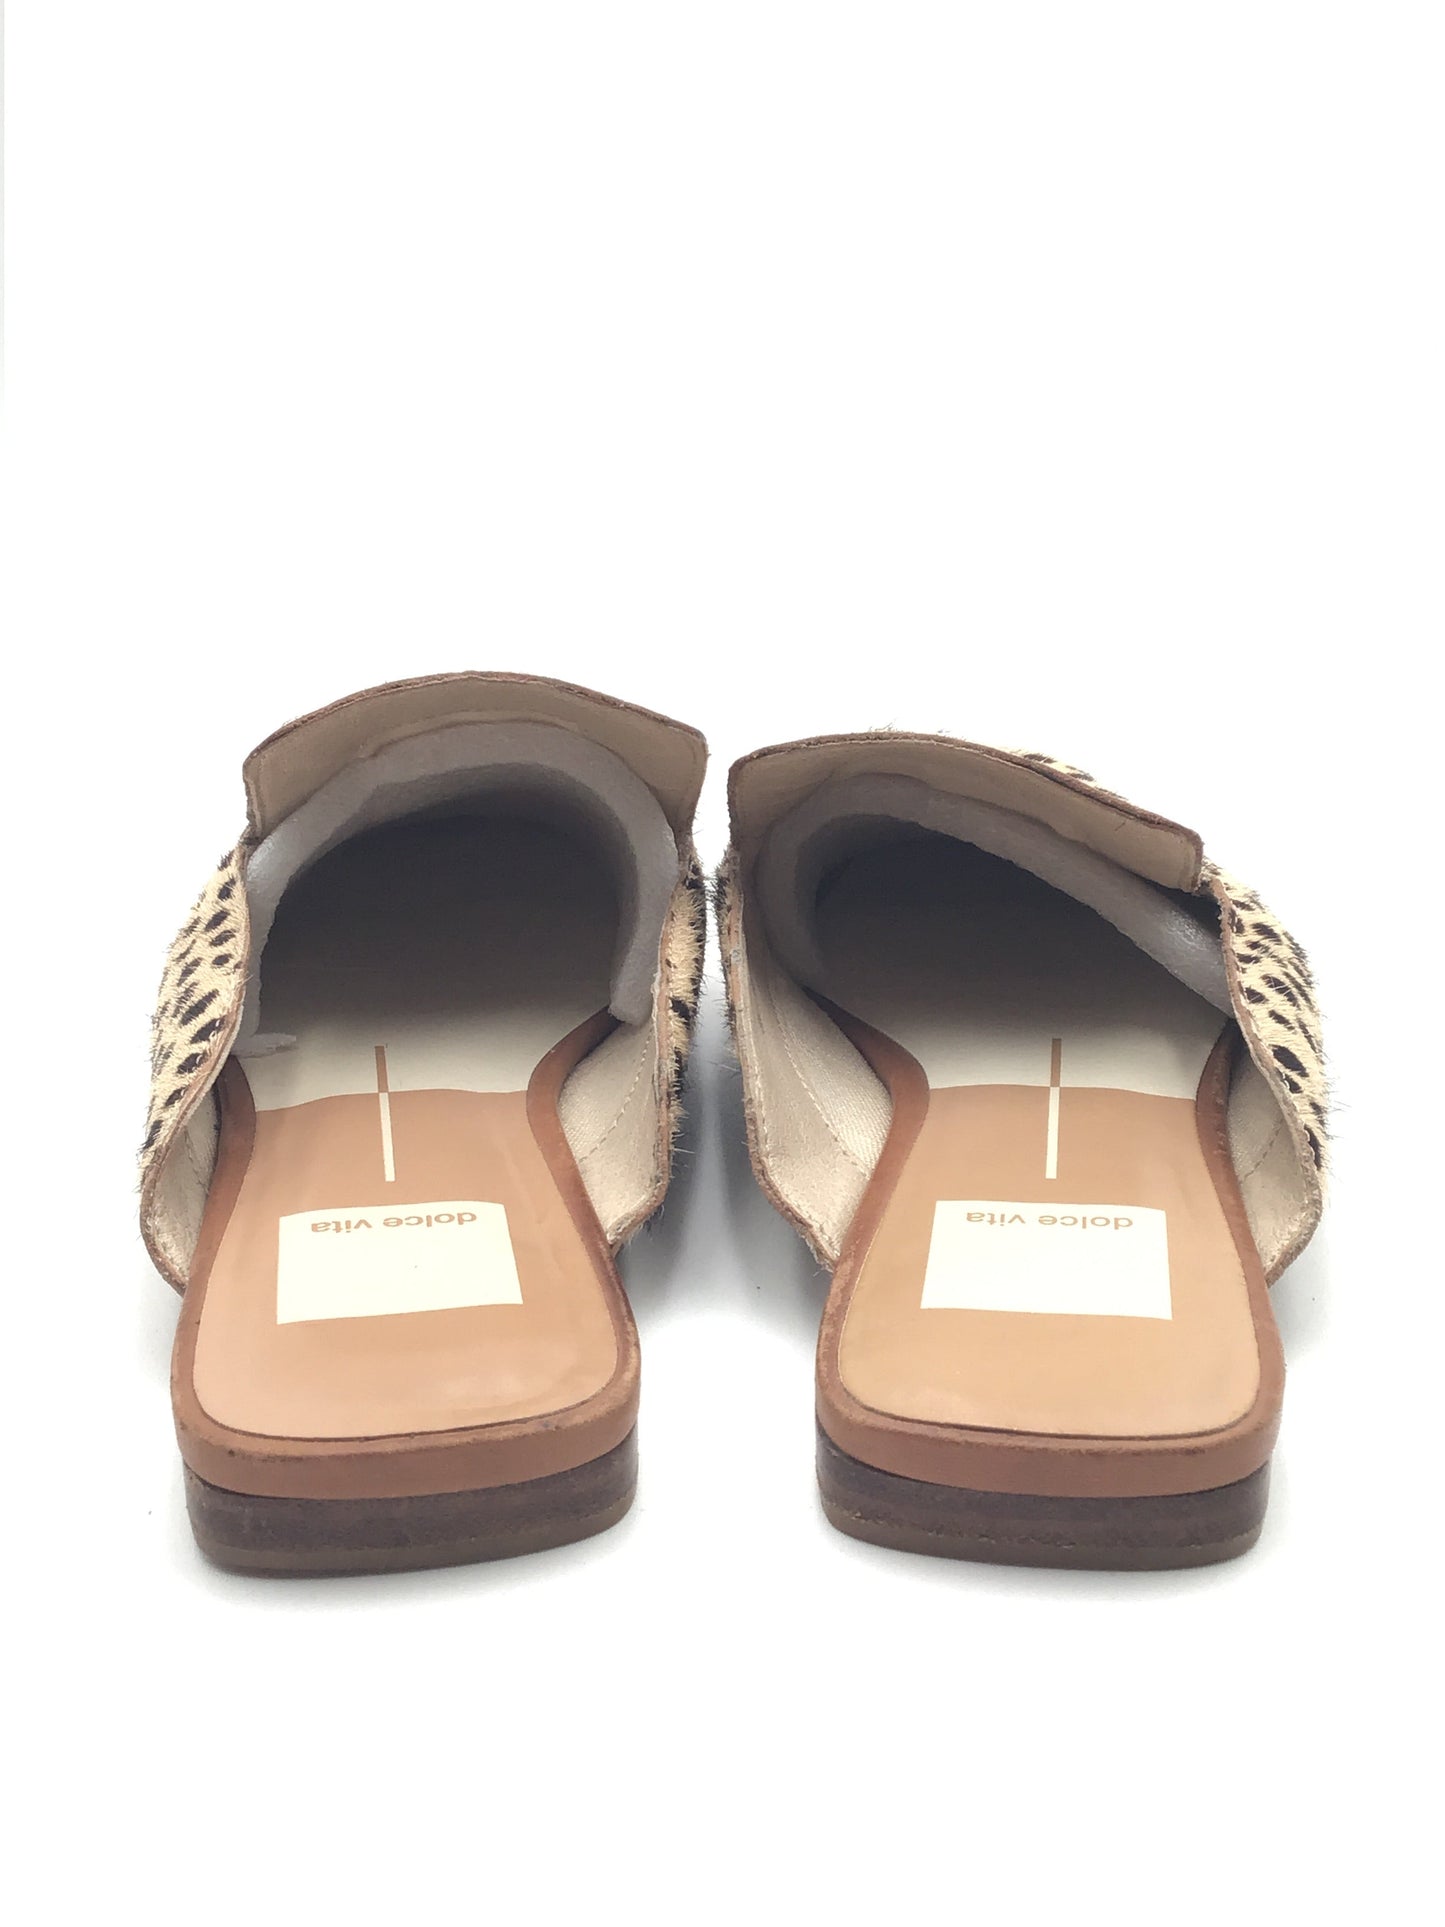 Tan Shoes Flats Other Dolce Vita, Size 6